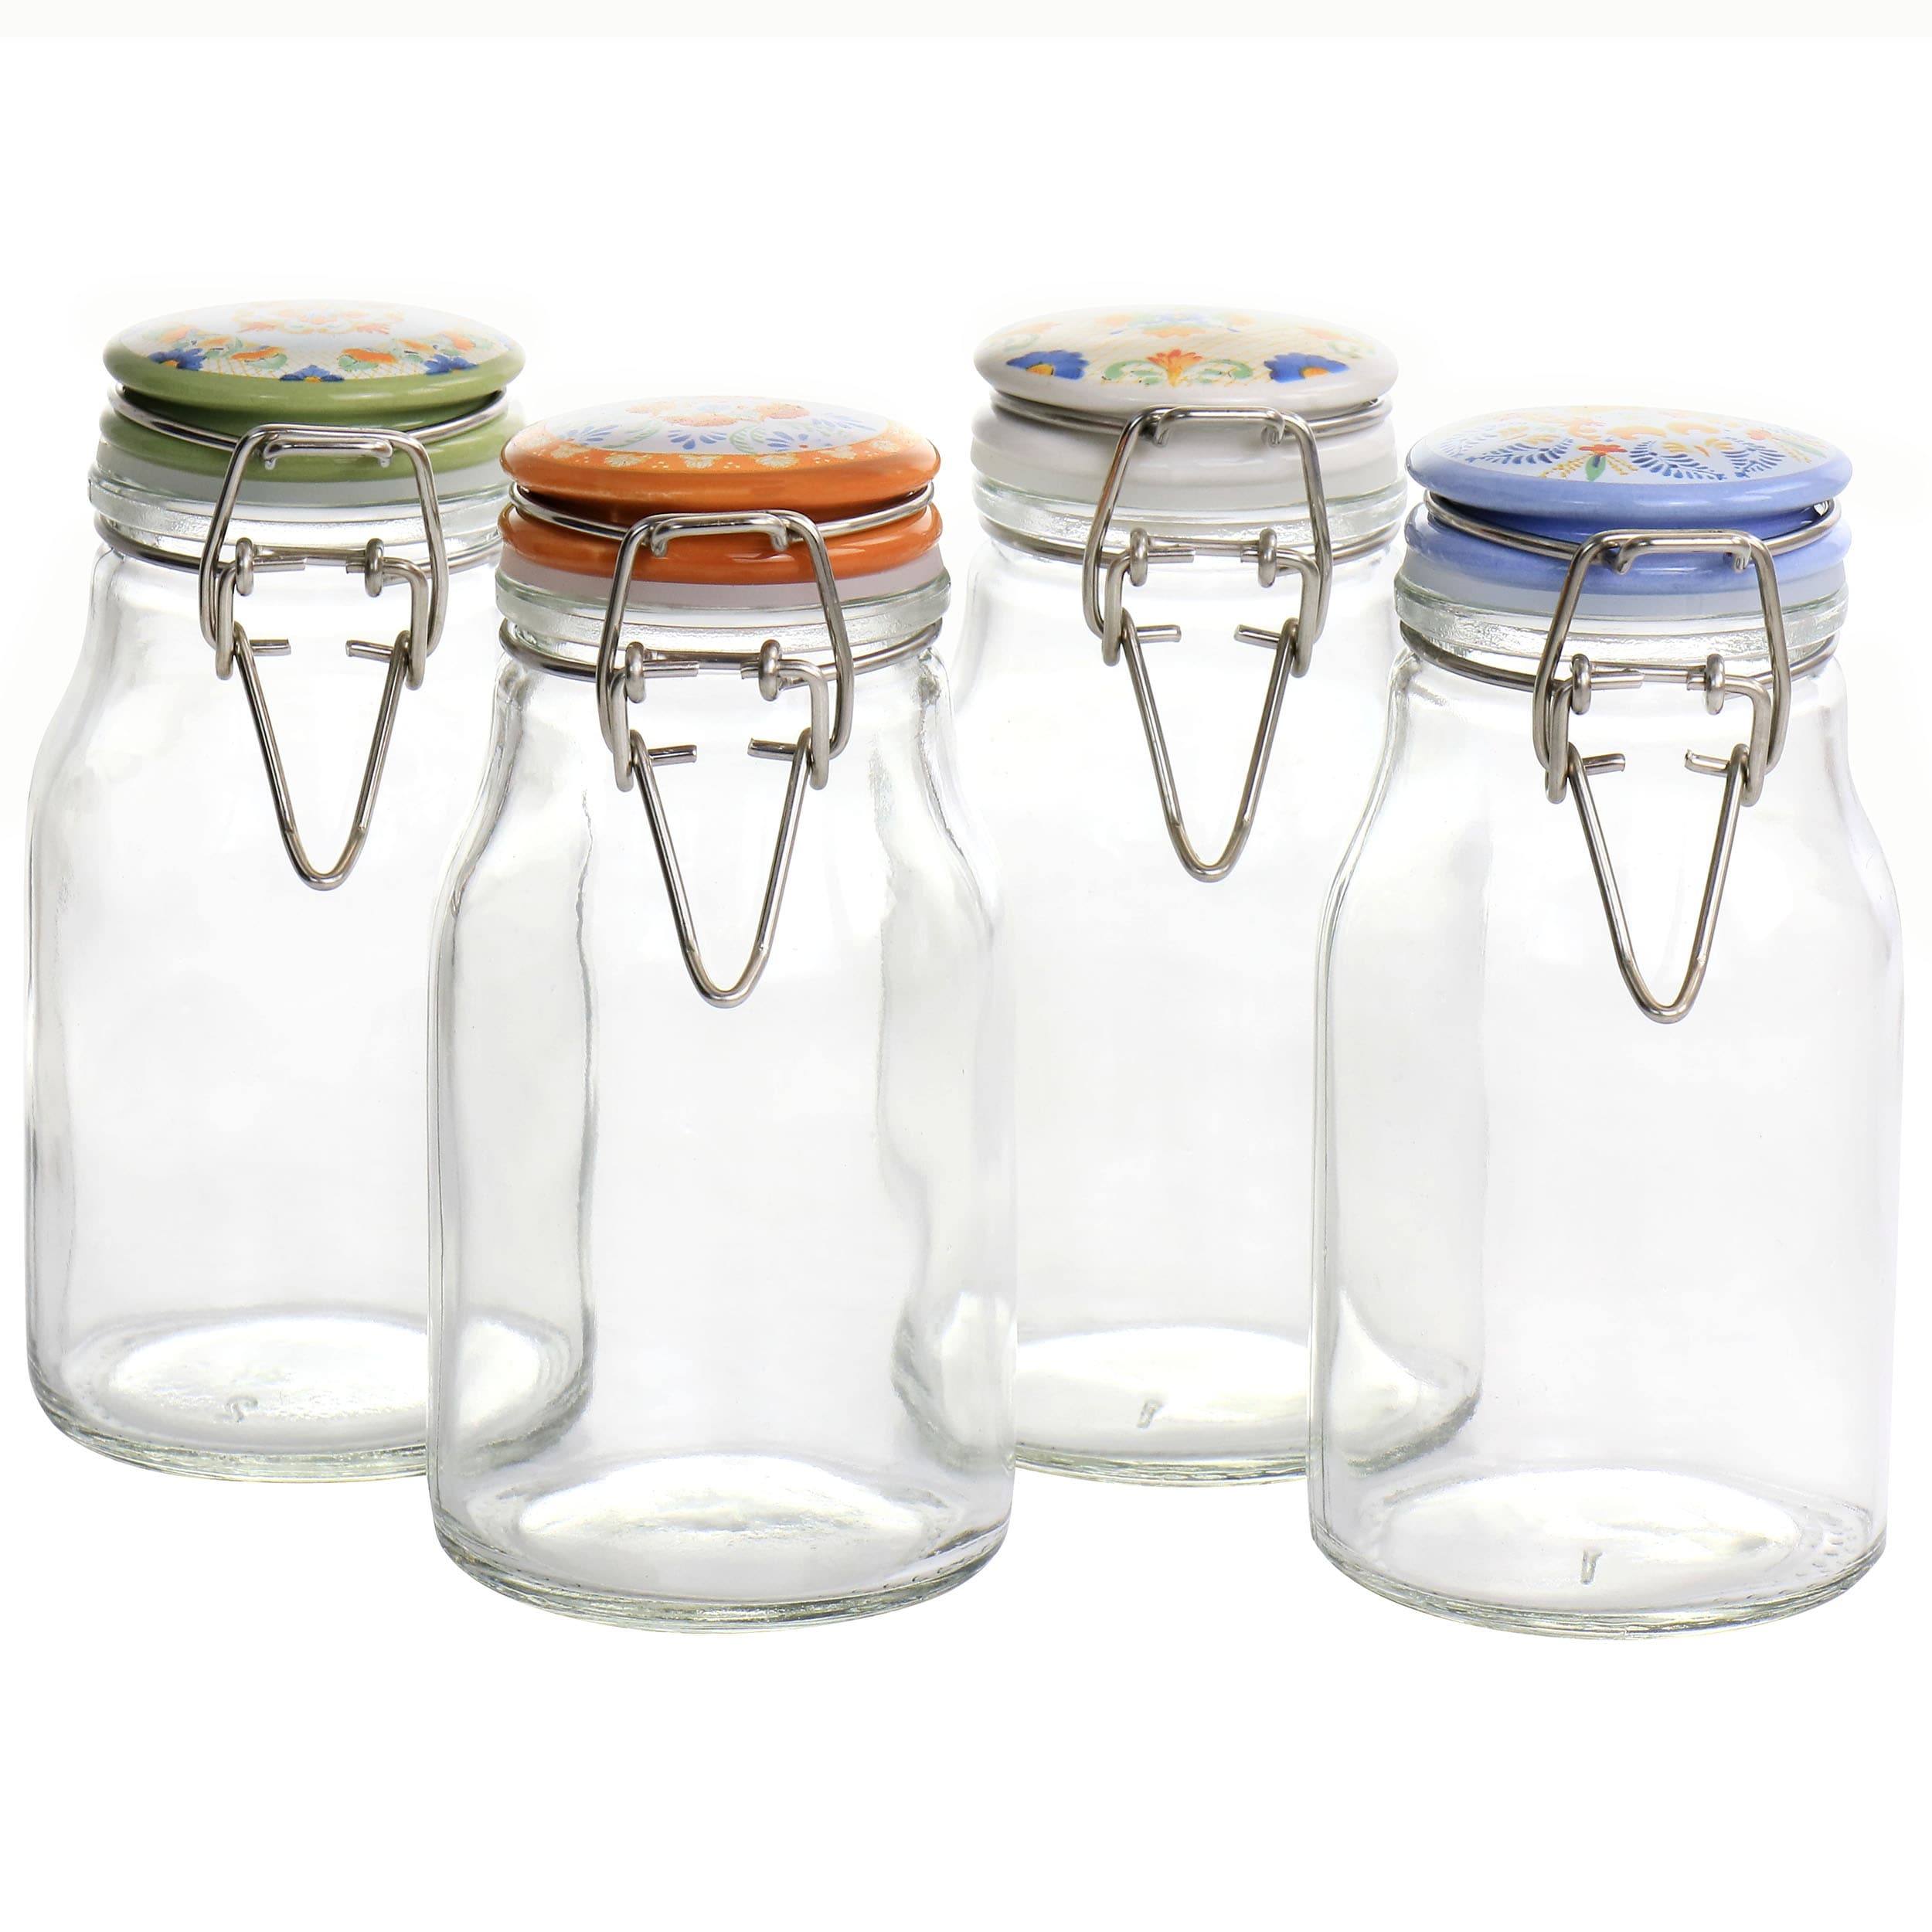 https://ak1.ostkcdn.com/images/products/is/images/direct/b2c05050d76c06a5699321f8041c763c26ce146b/Laurie-Gates-Tierra-4-Piece-Mini-Glass-Jar-Canister-Set.jpg